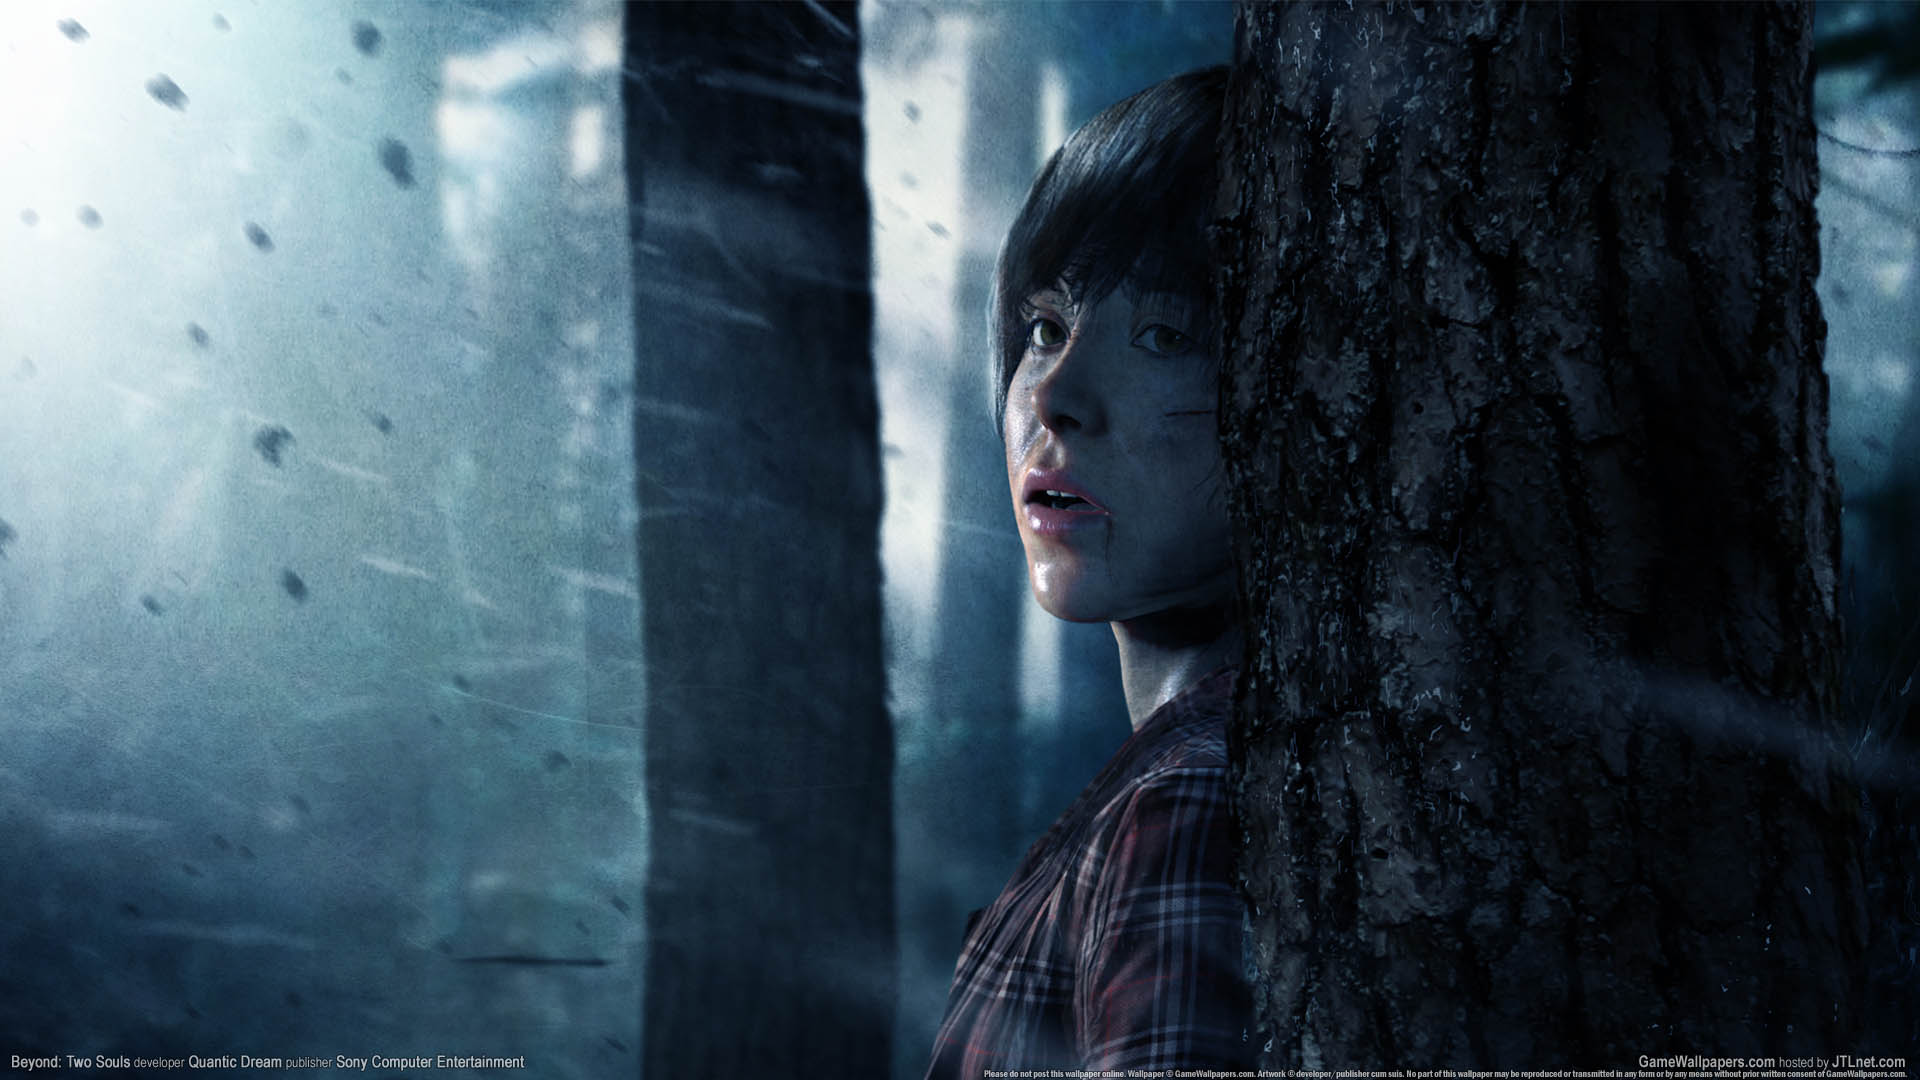 Beyond: Two Souls achtergrond 01 1920x1080